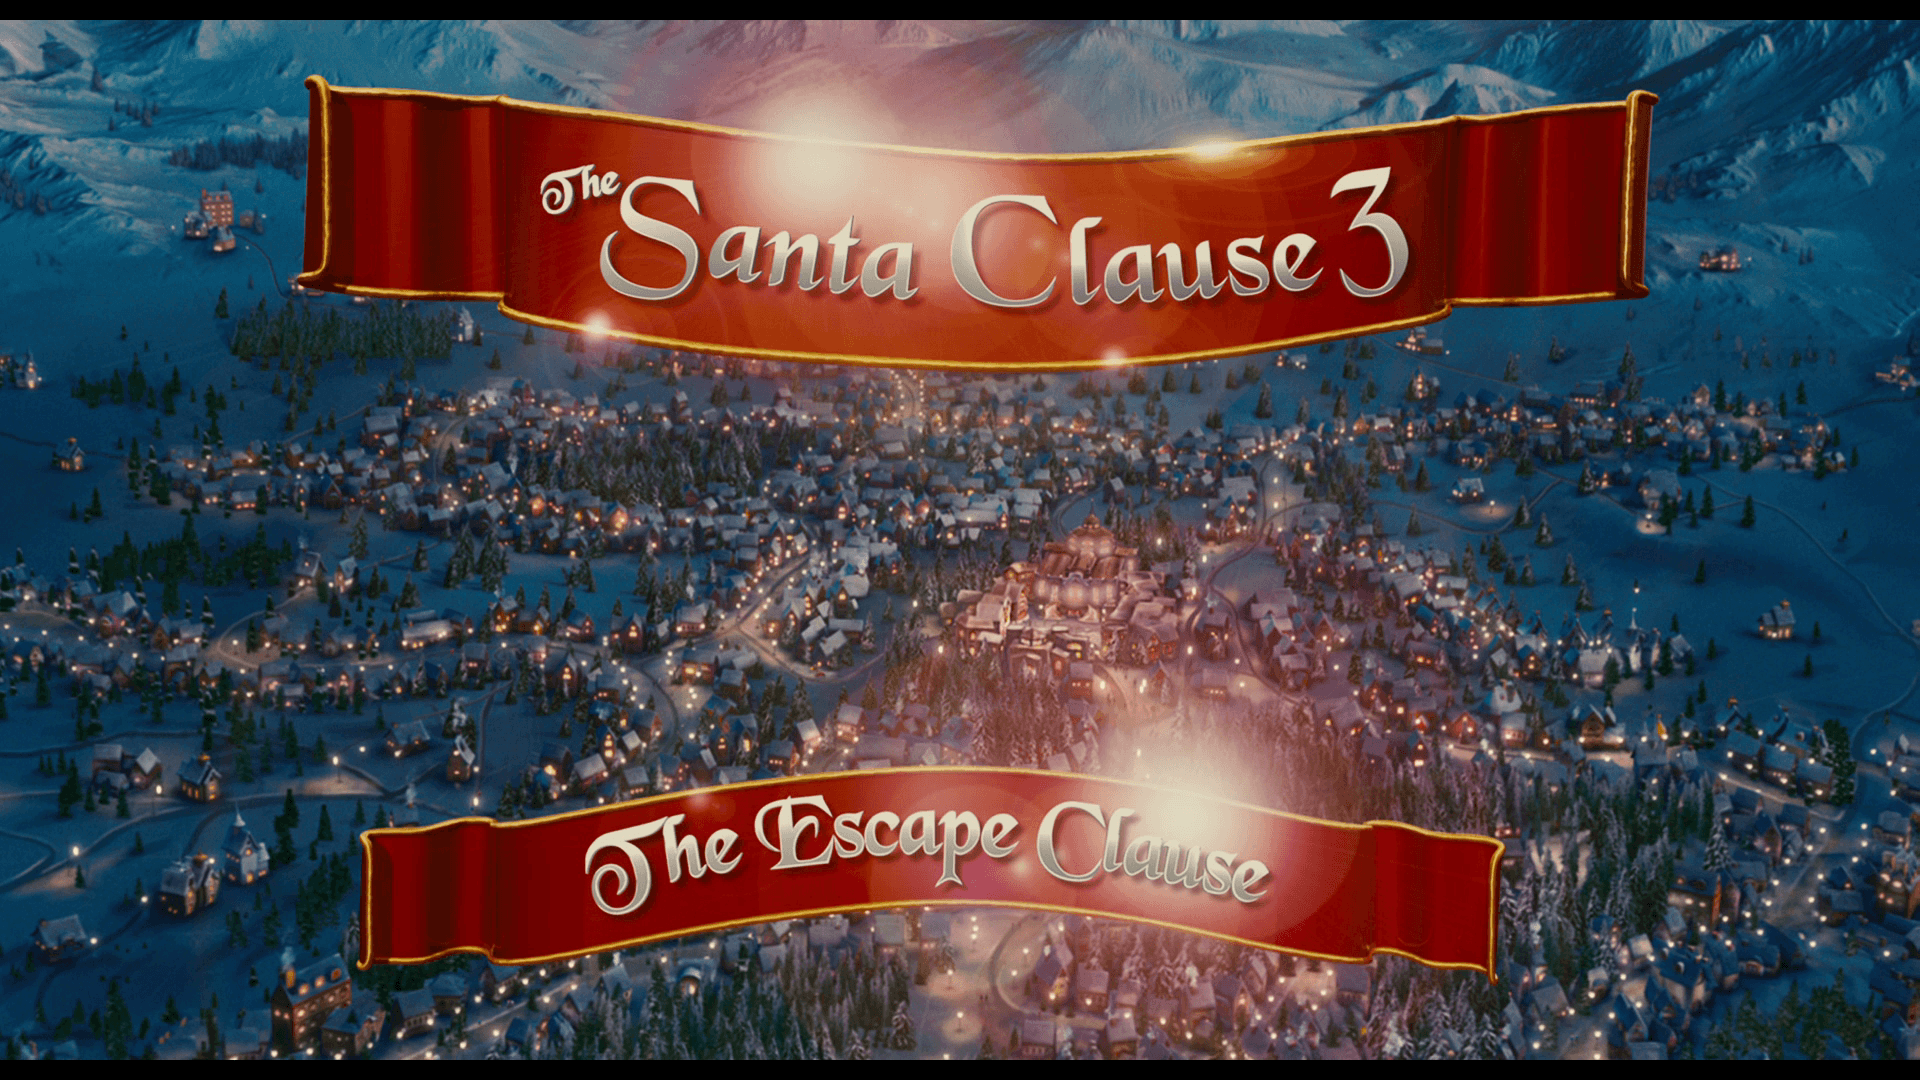 The Santa Clause: The Complete 3 Movie Collection (Blu Ray), DVD